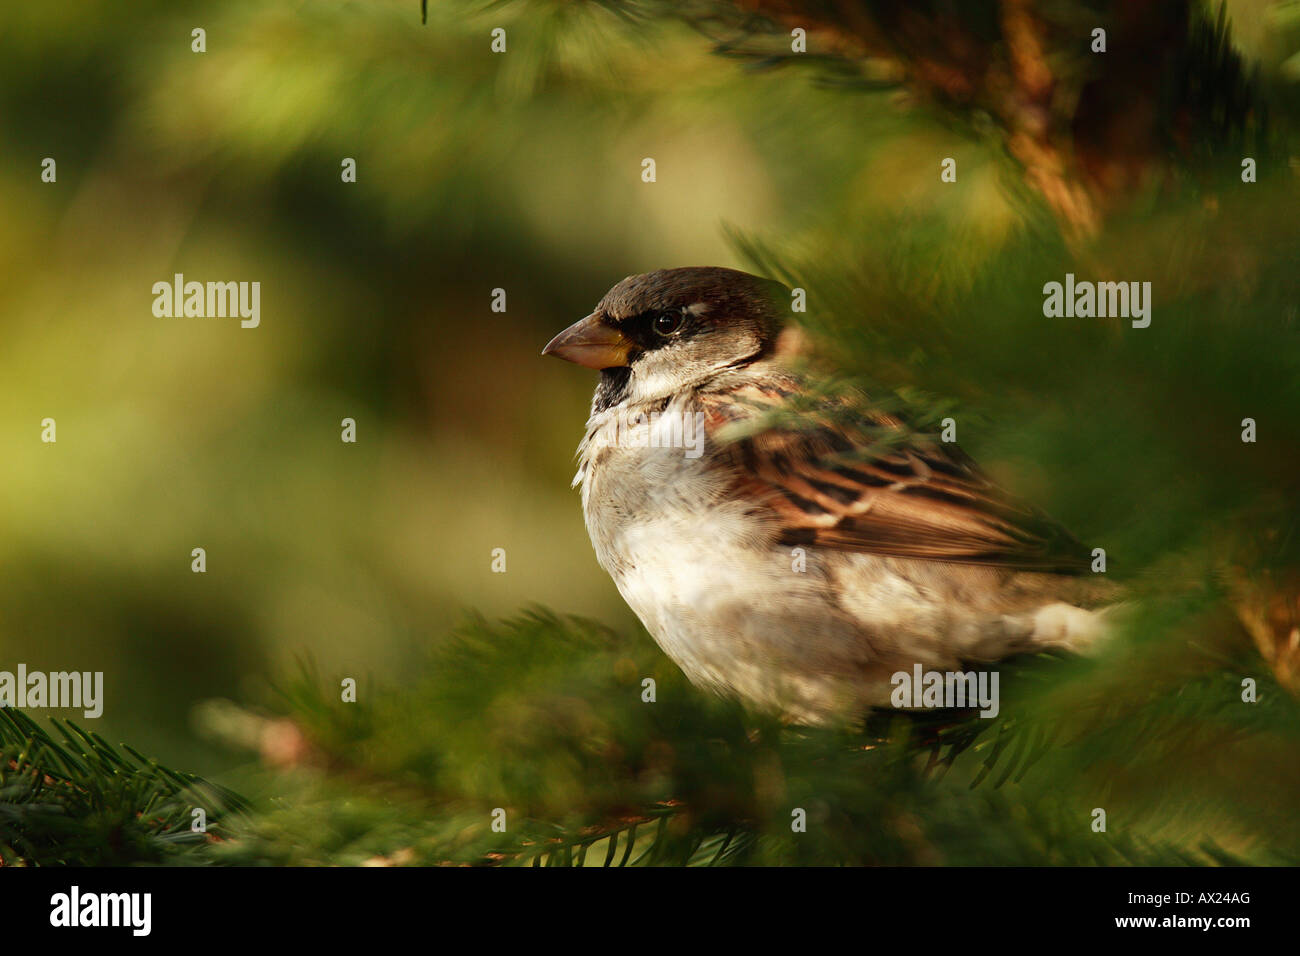 House Sparrow or English Sparrow (Passer domesticus) Stock Photo